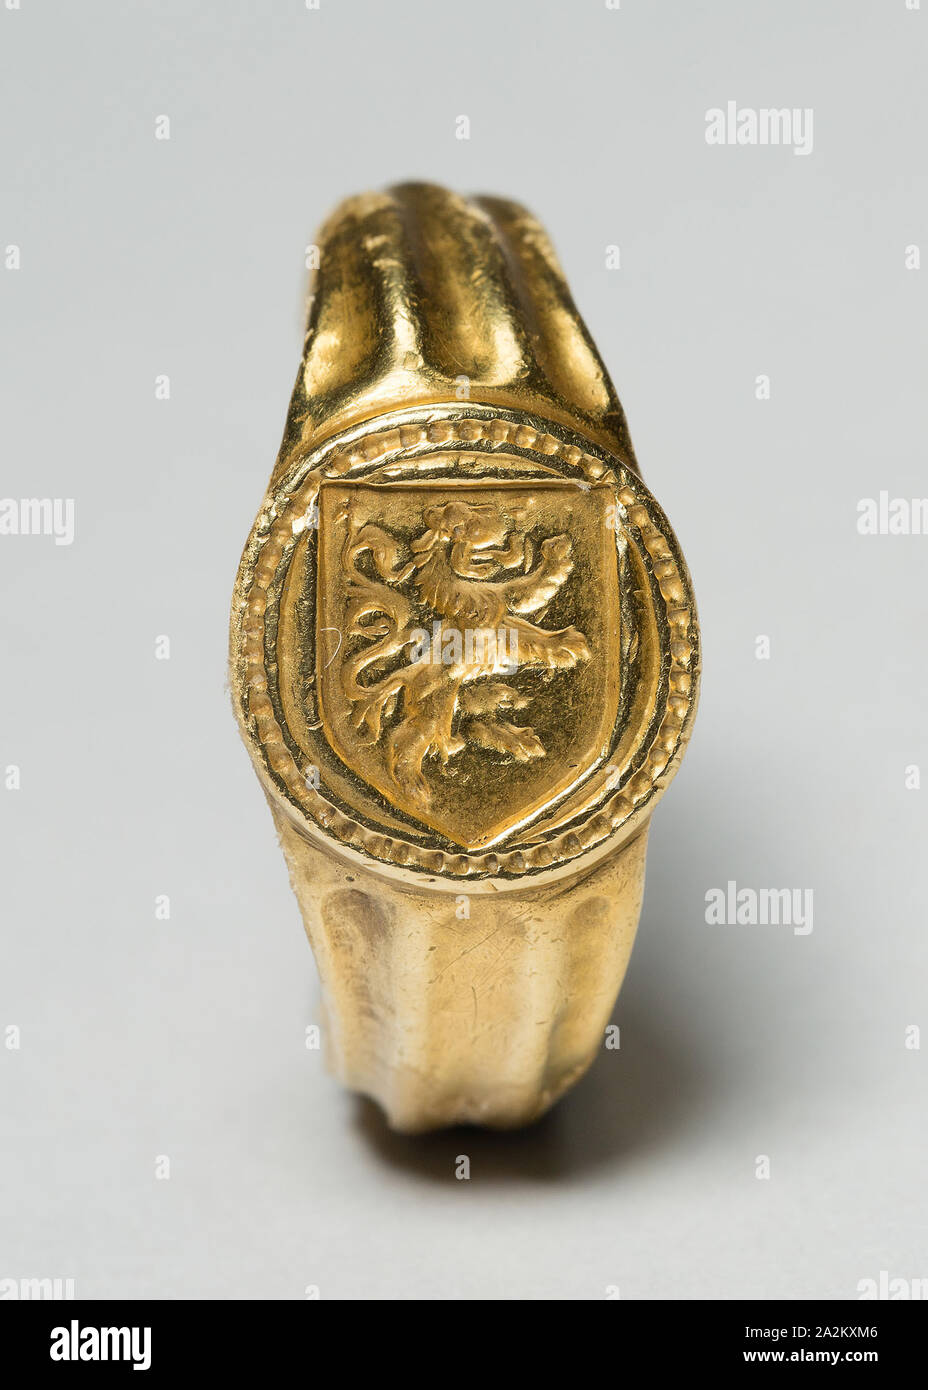 Signet Ring with a Rampant Lion, 1475/1500, Netherlandish, probably Bruges, Bruges, Gold, Circumference: 6.4 cm (2 1/2 in.), Diameter: 2 cm (3/4 in Stock Photo